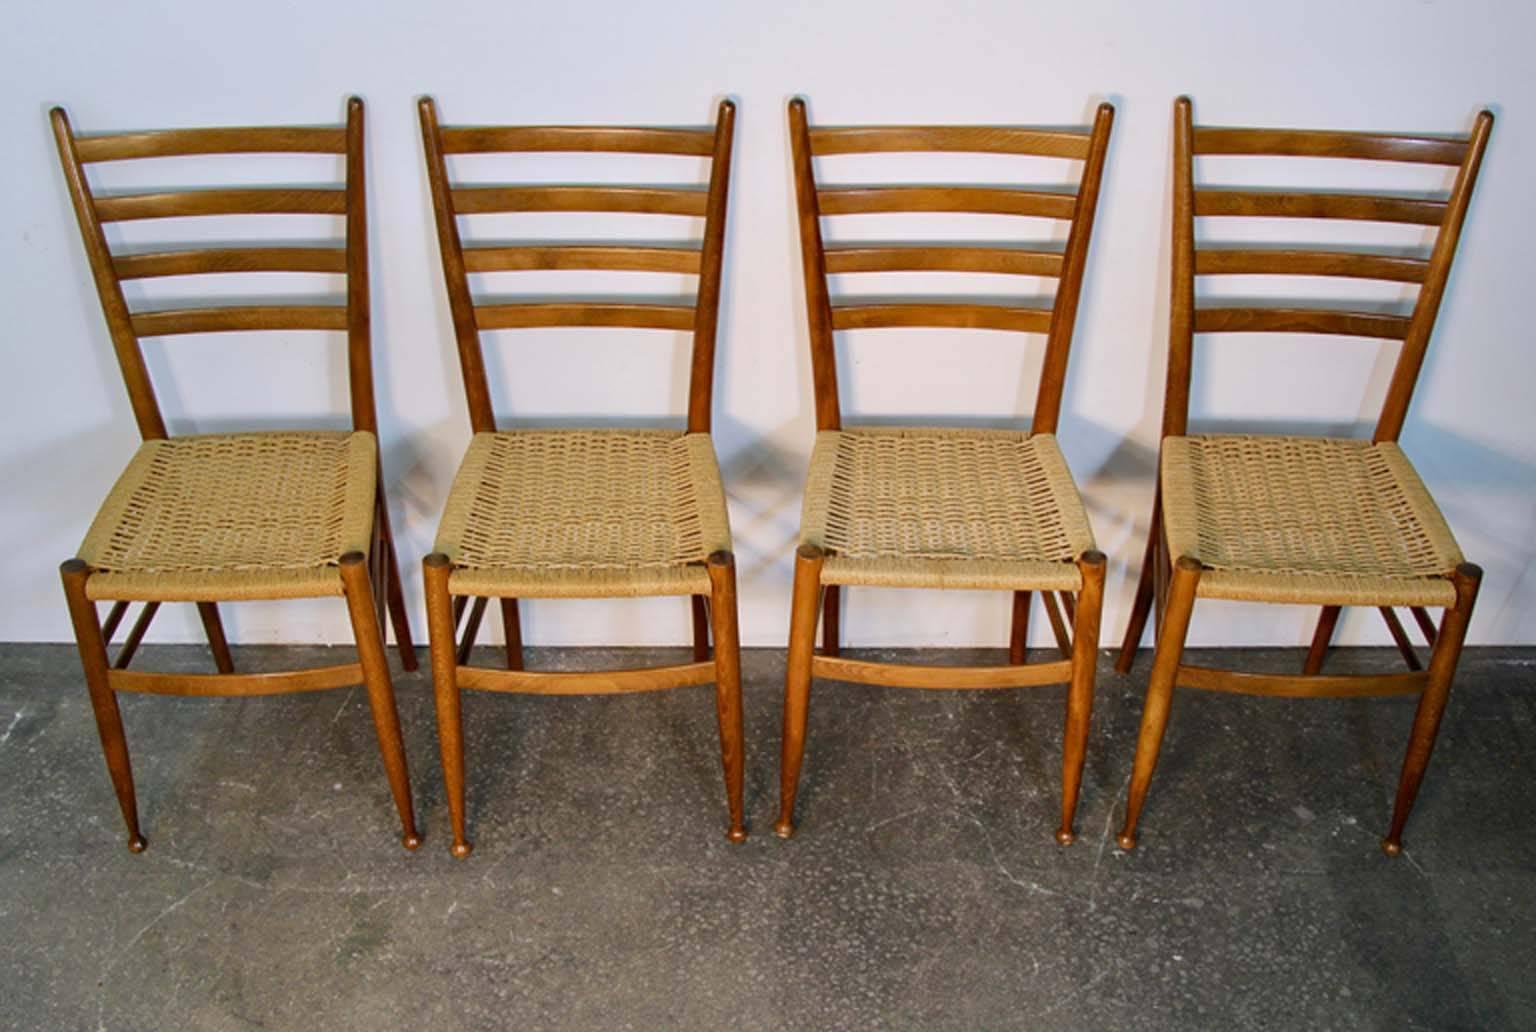 Simplicity and elegance these beautiful wood chairs with rush seats are in original vintage condition and have been freshly hand polished they are made in Italy and very much in the style of Gio Ponti.